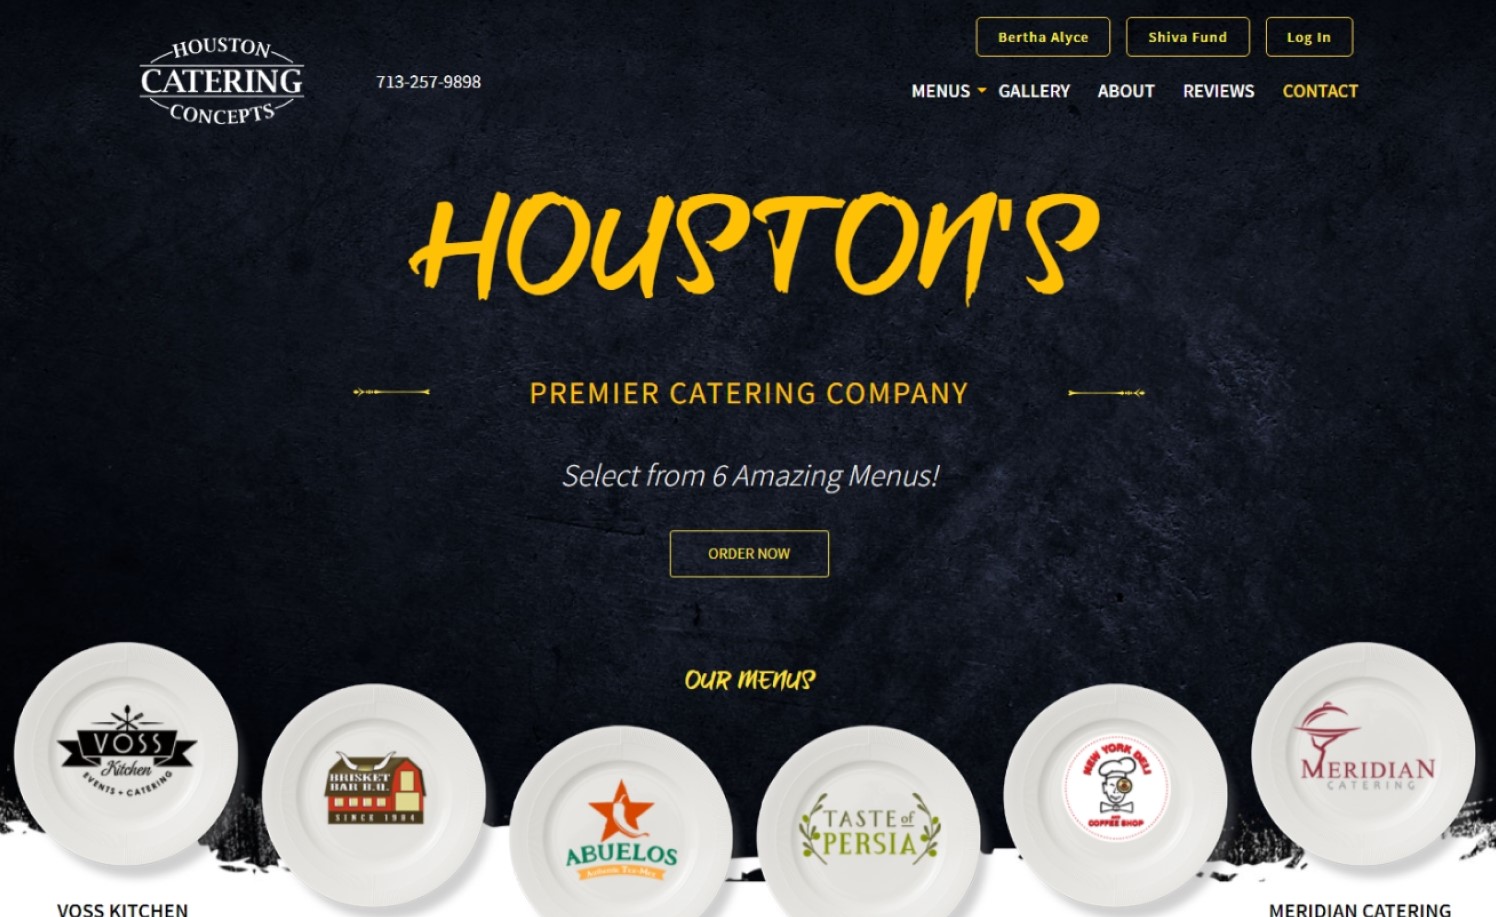 Website of Houston Catering Concepts